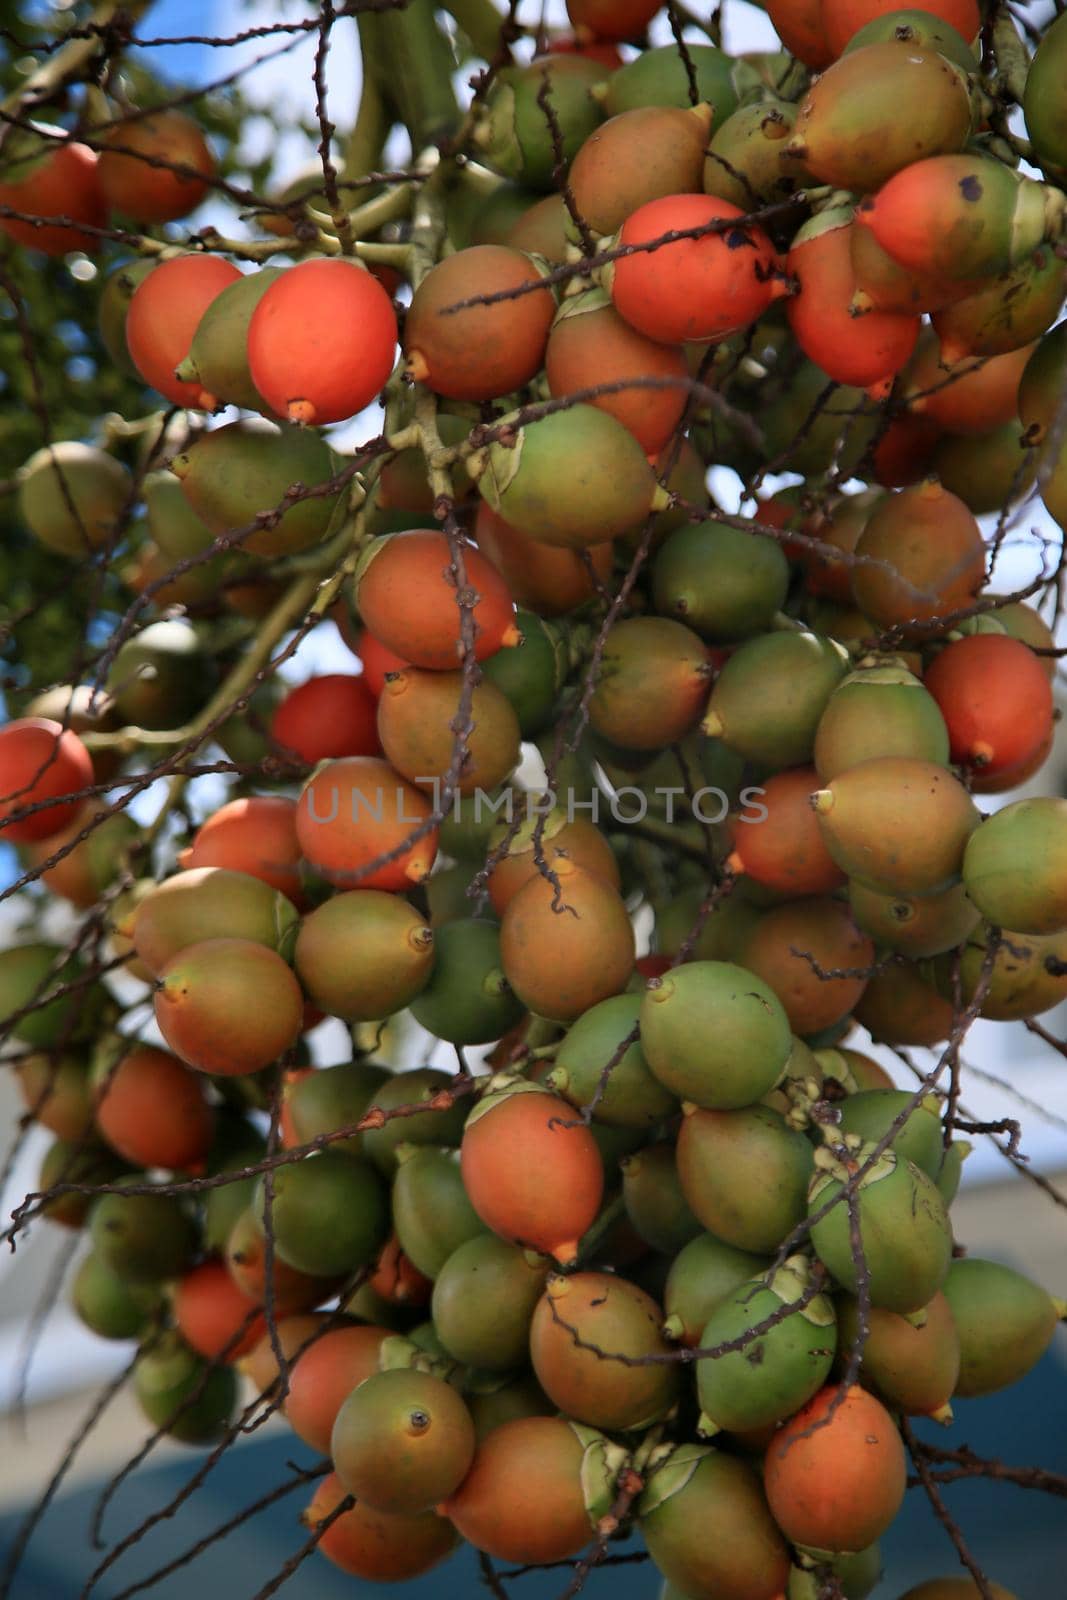 salvador, bahia, brazil - january 25, 2021: fruits of the areca catechu palm plant found in some tropical countries is seen in the city of Salvador.